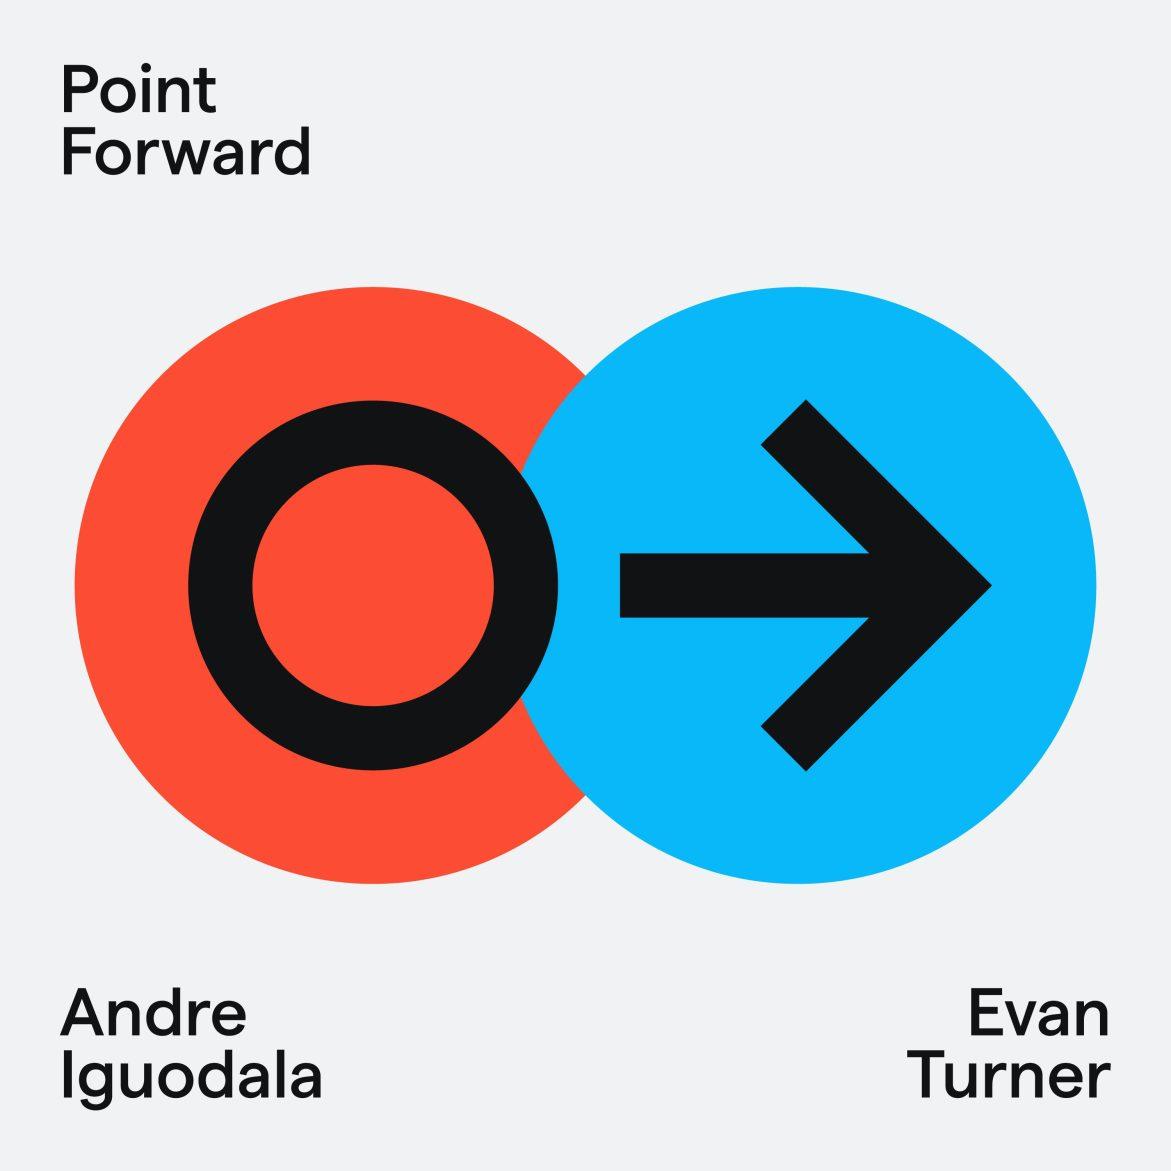 Black Podcasting - Introducing: Point Forward podcast with Andre Iguodala and Evan Turner